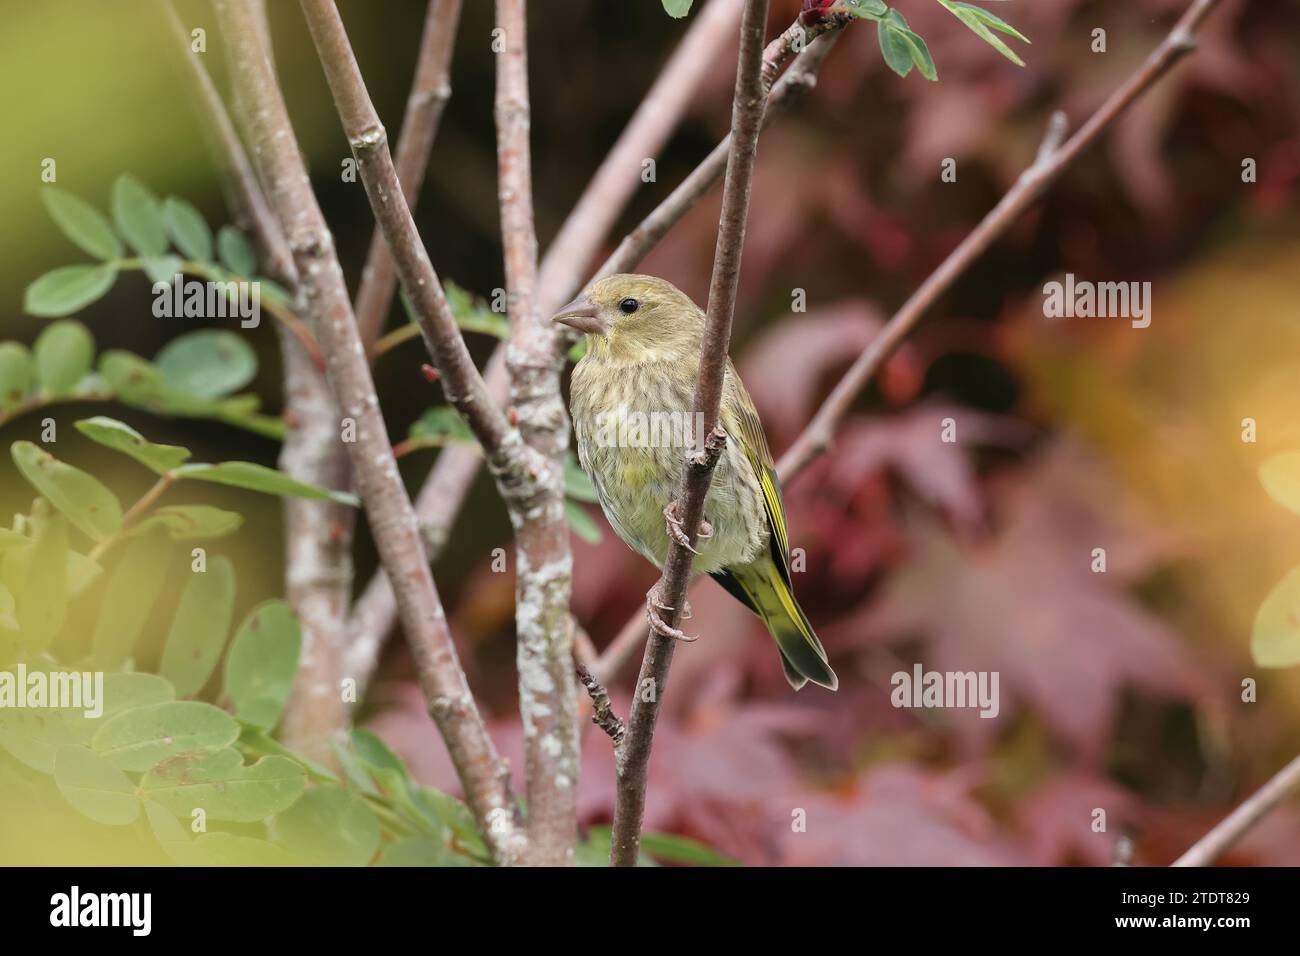 Greenfinch female, Carduelis chloris, perched in a garden setting, Mid Wales, uk Stock Photo